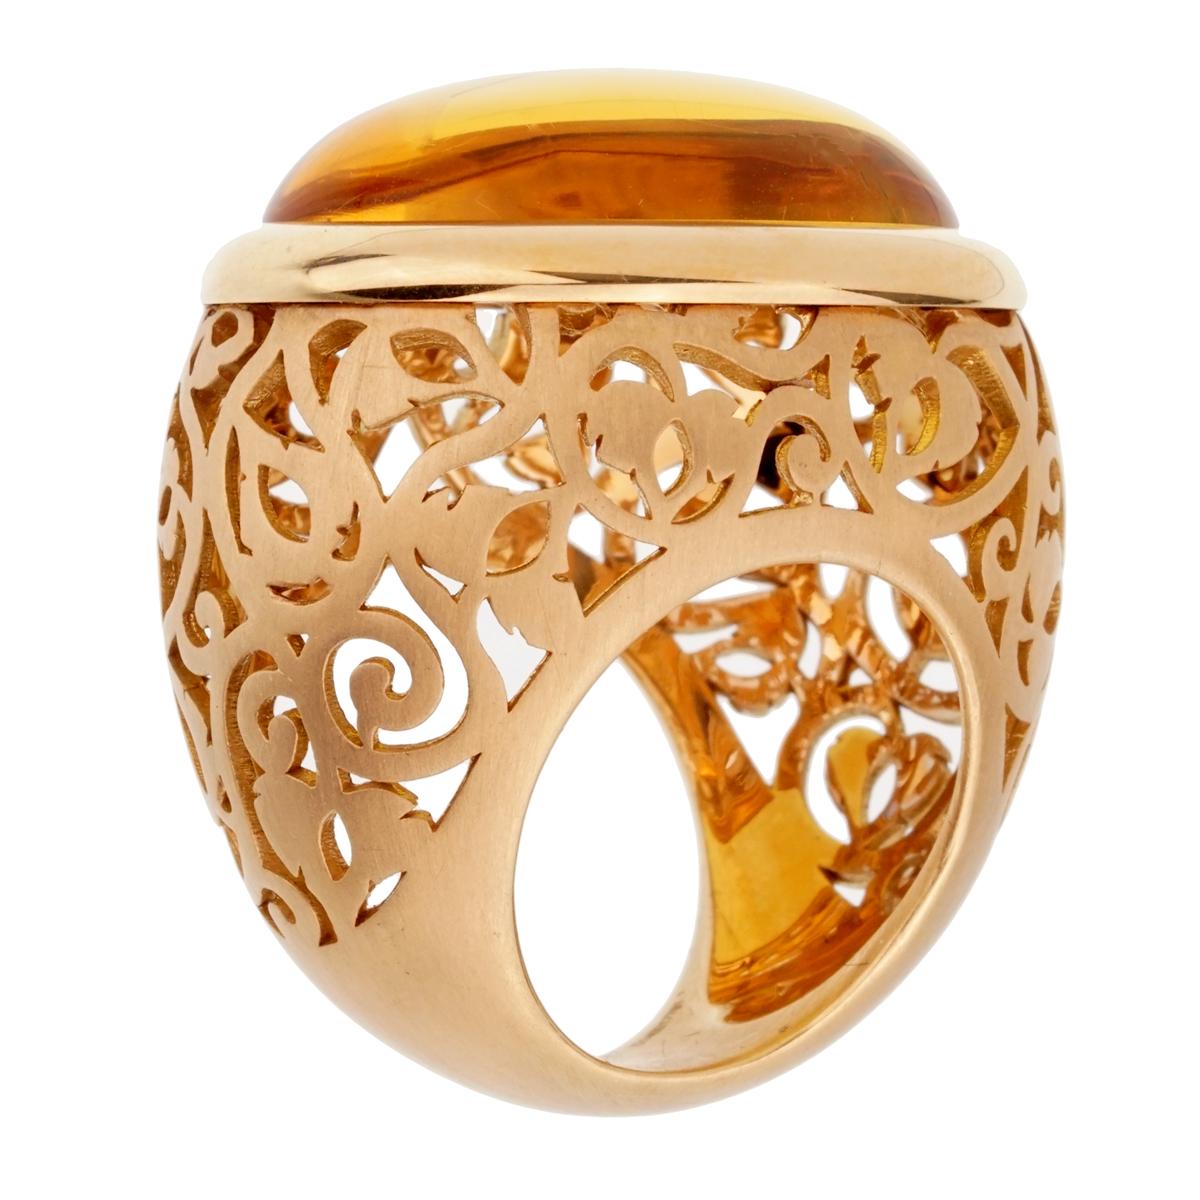 A magnificent brand new Pomellato rose gold cocktail ring showcasing a 19.94ct cabochon Amber. The ring measures a size 5.25 and can be resized.

Pomellato Retail Price: $7,800
Sku: 2321